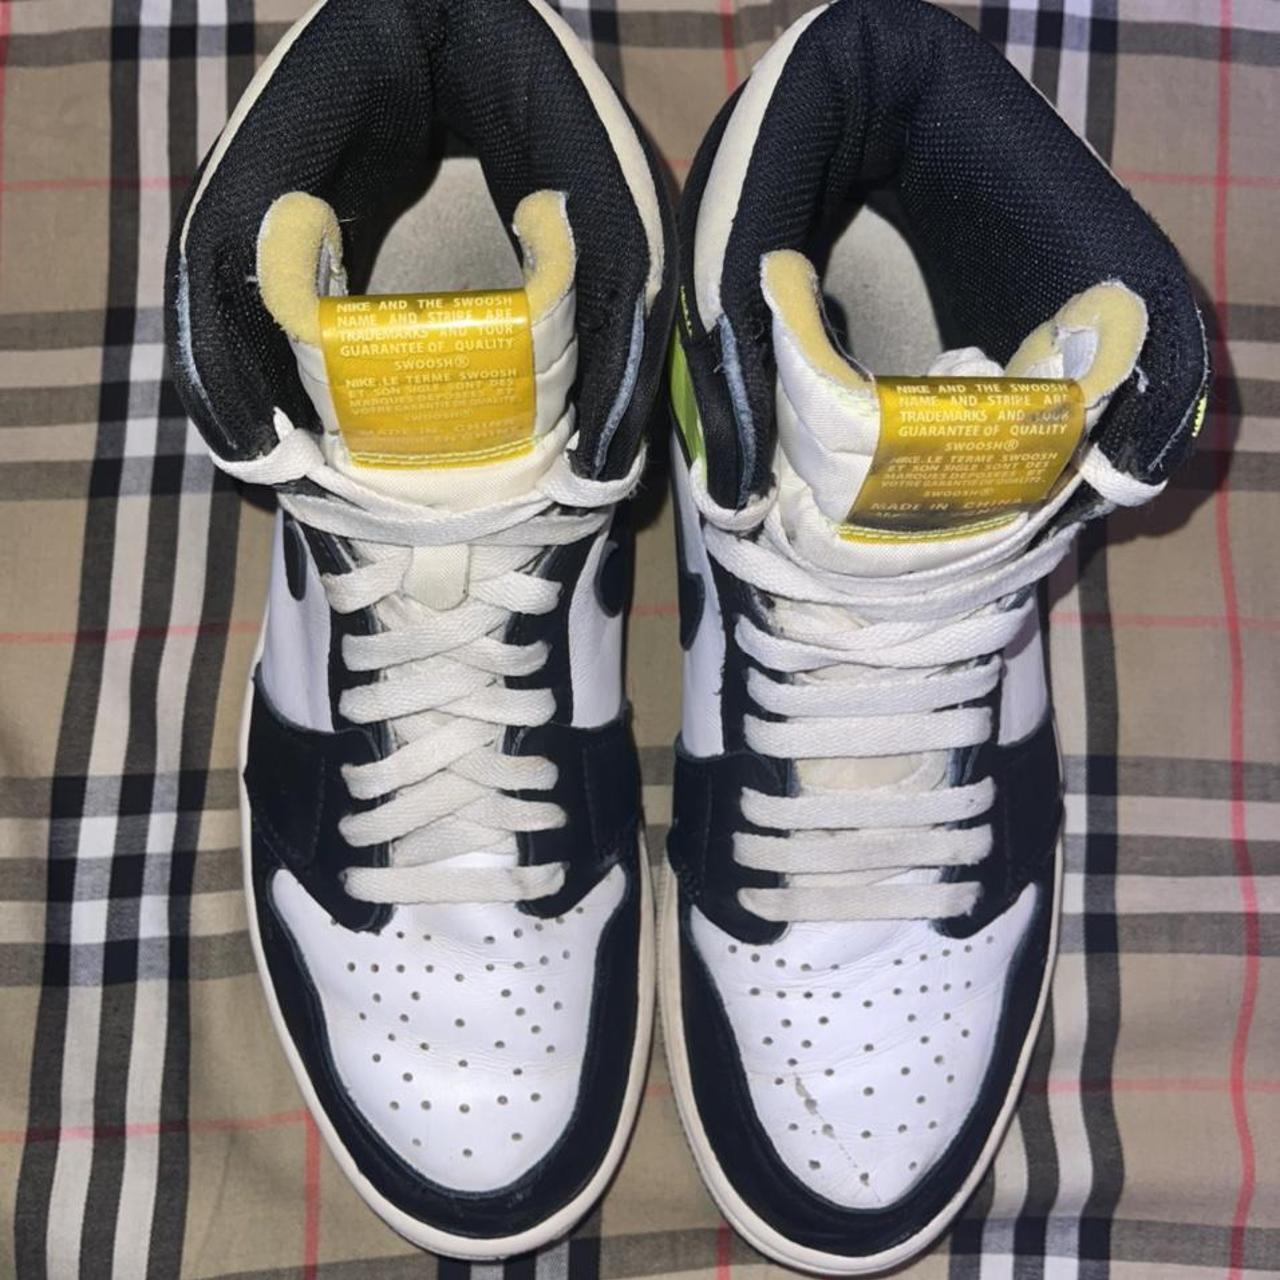 Nike Jordan 1 volt gold in a size 10 beaters with... - Depop